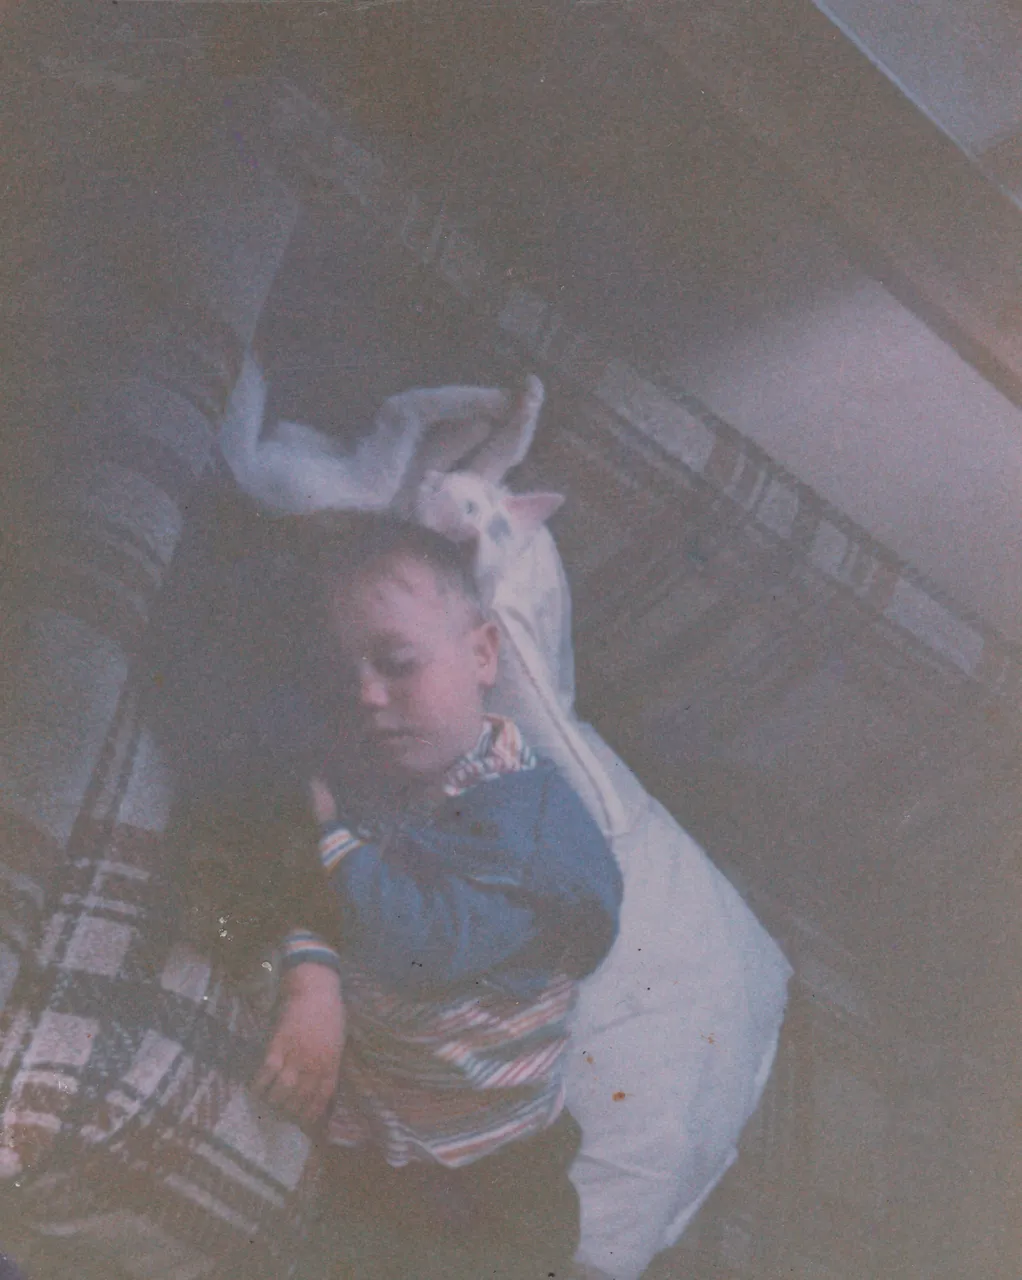 1987 apx - Joey, Kitten, Couch, Nap.png